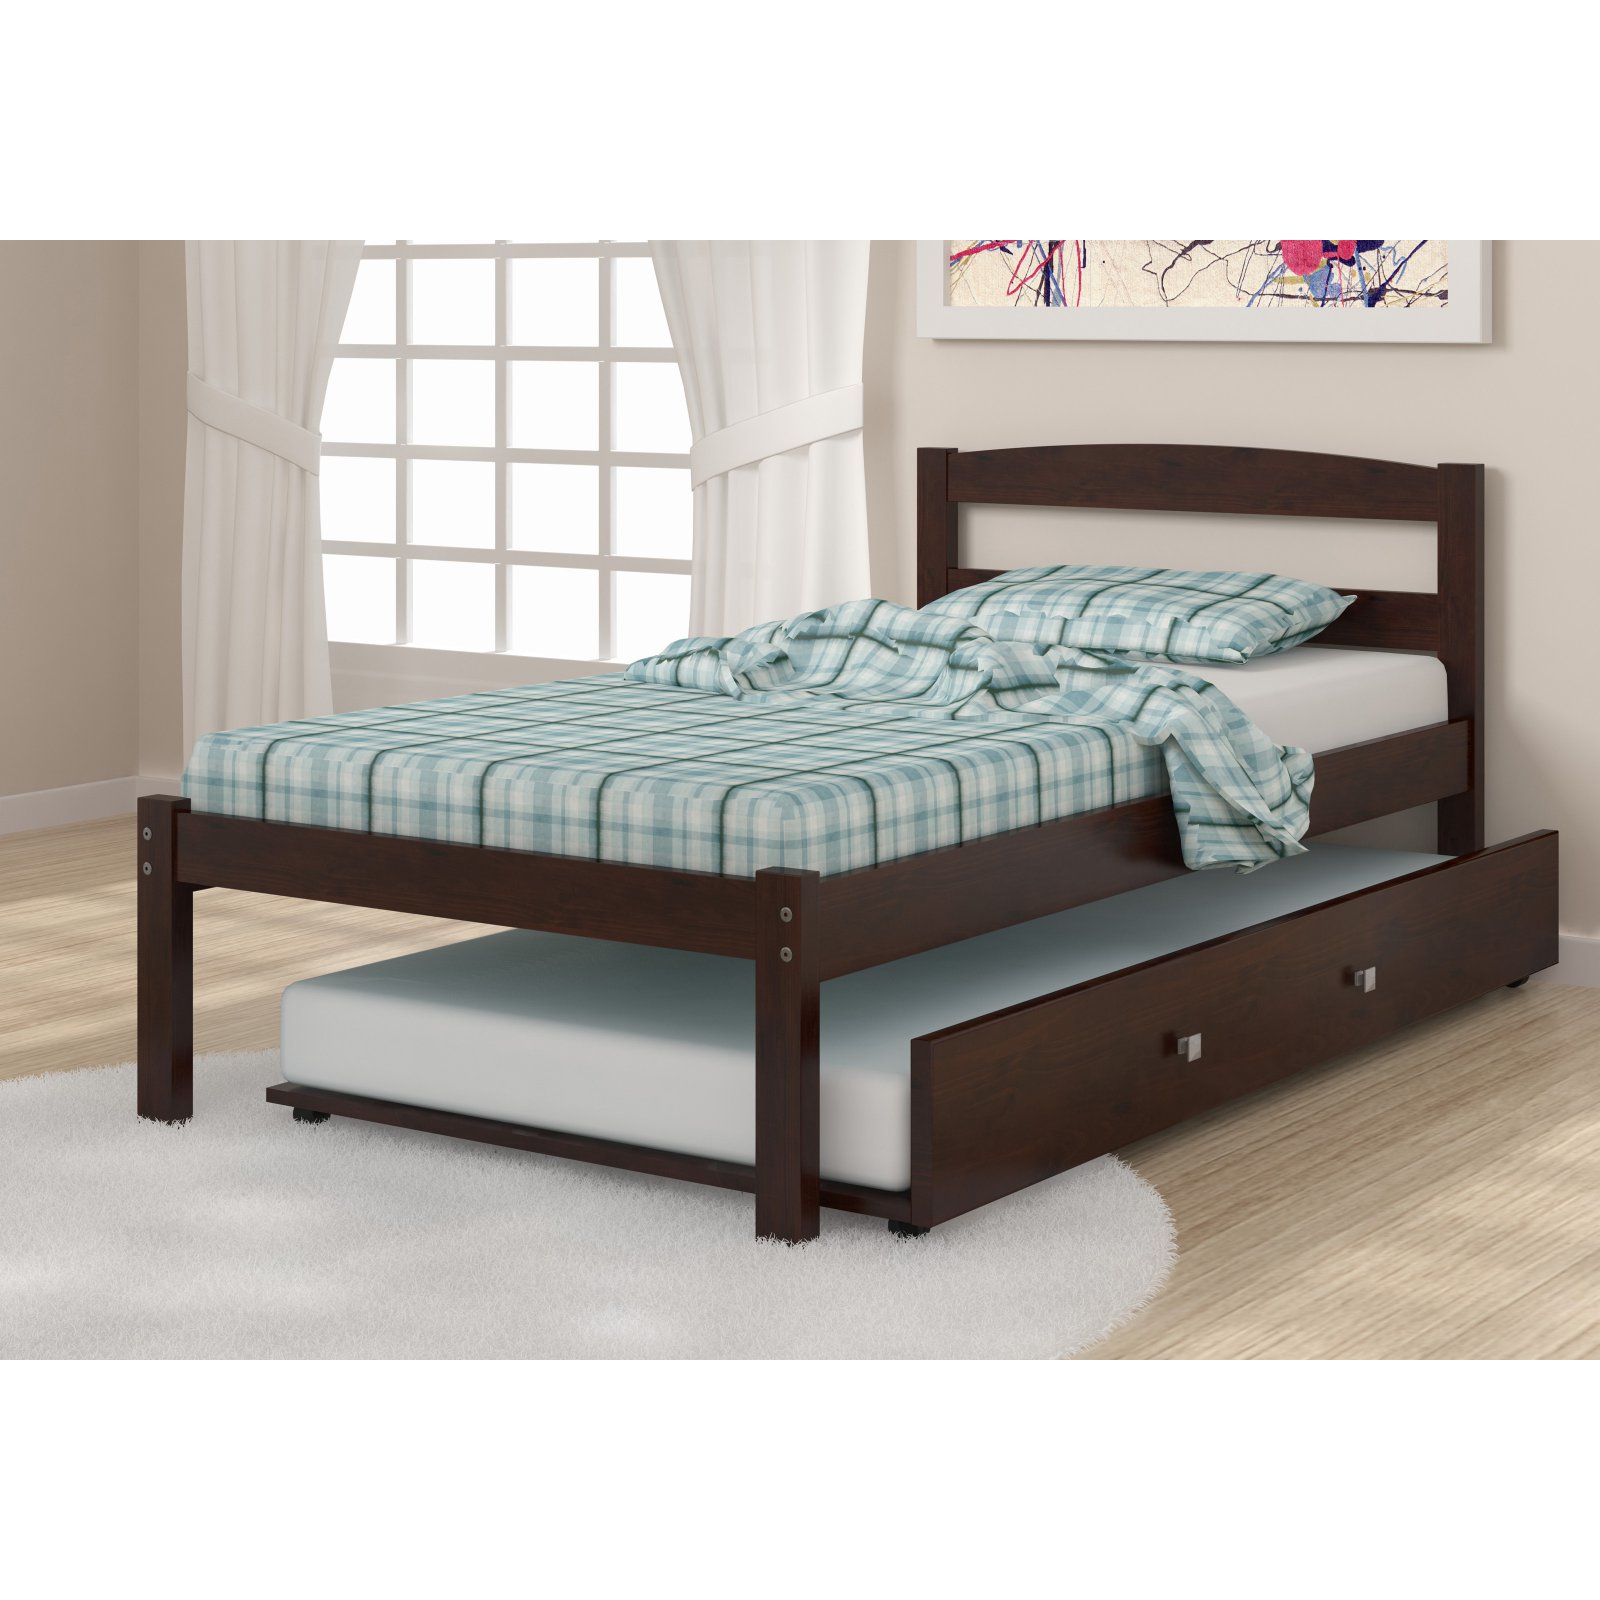 Donco Kids Econo Panel Bed - image 4 of 11